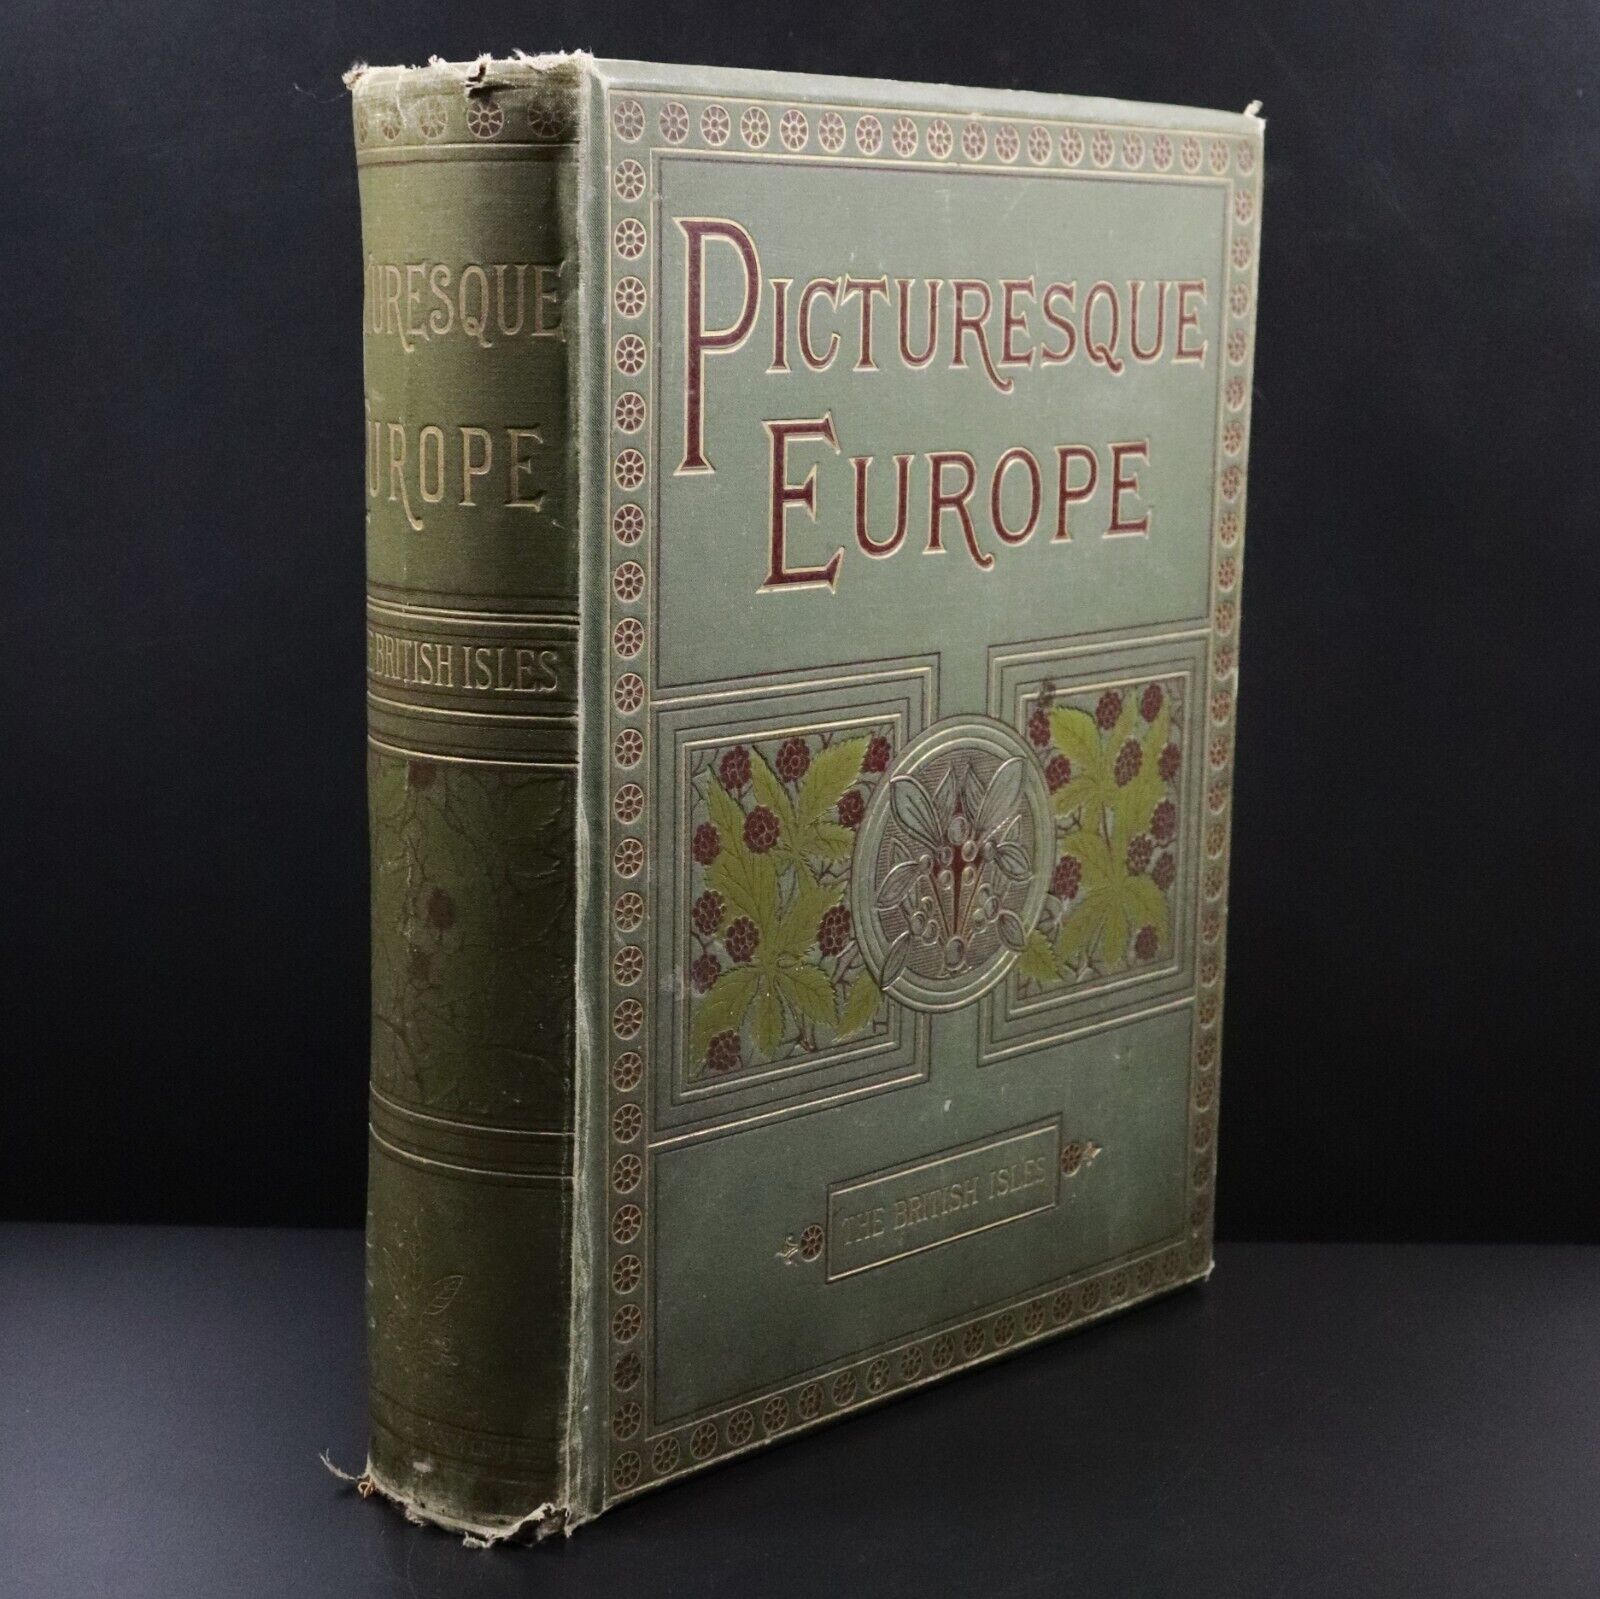 c1890 Picturesque Europe: The British Isles Antiquarian Illustrated History Book